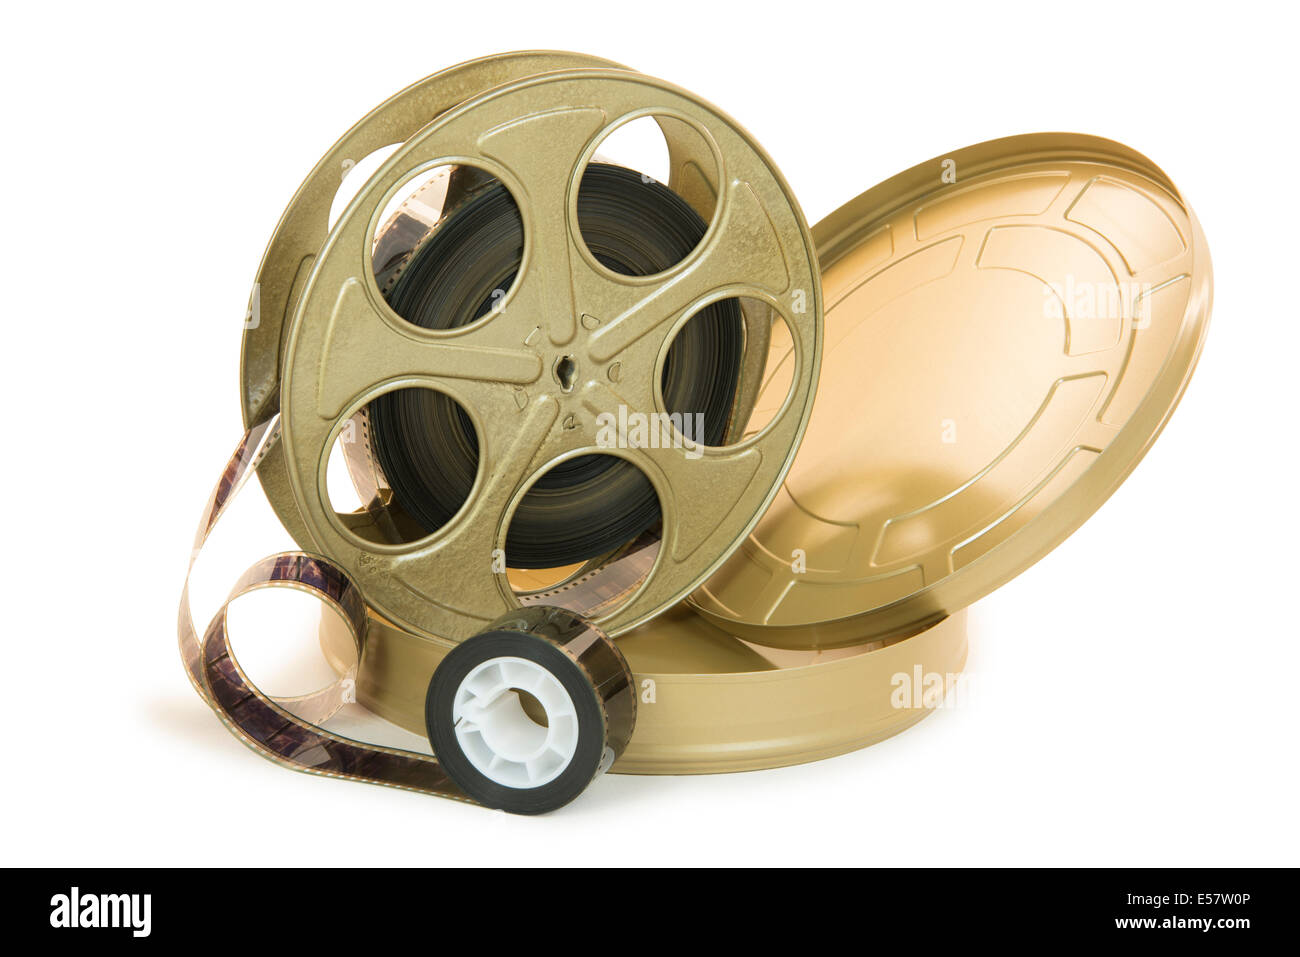 A 35mm film in a metallic golden reel and its can, isolated over